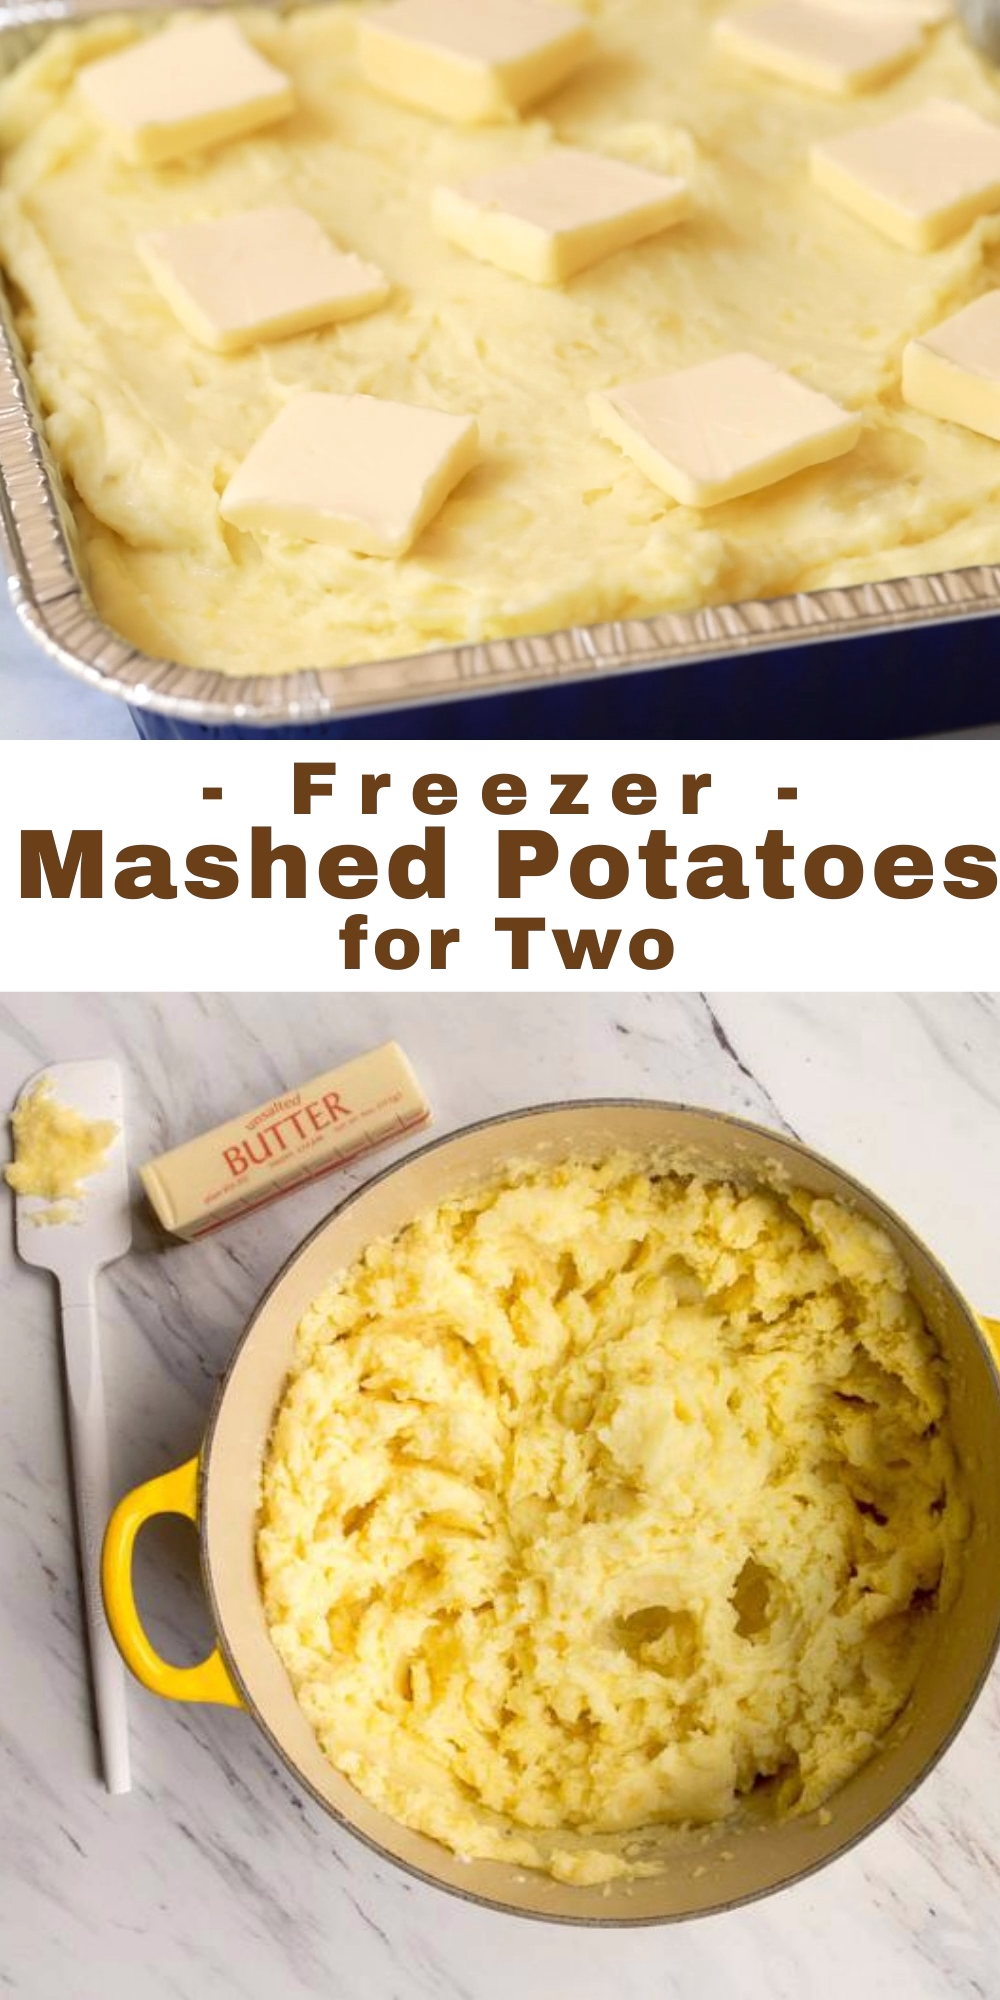 Make Ahead Mashed Potatoes Freezer Meal for Two (Small Batch) | Dessert for Two -   25 thanksgiving desserts for a crowd videos ideas